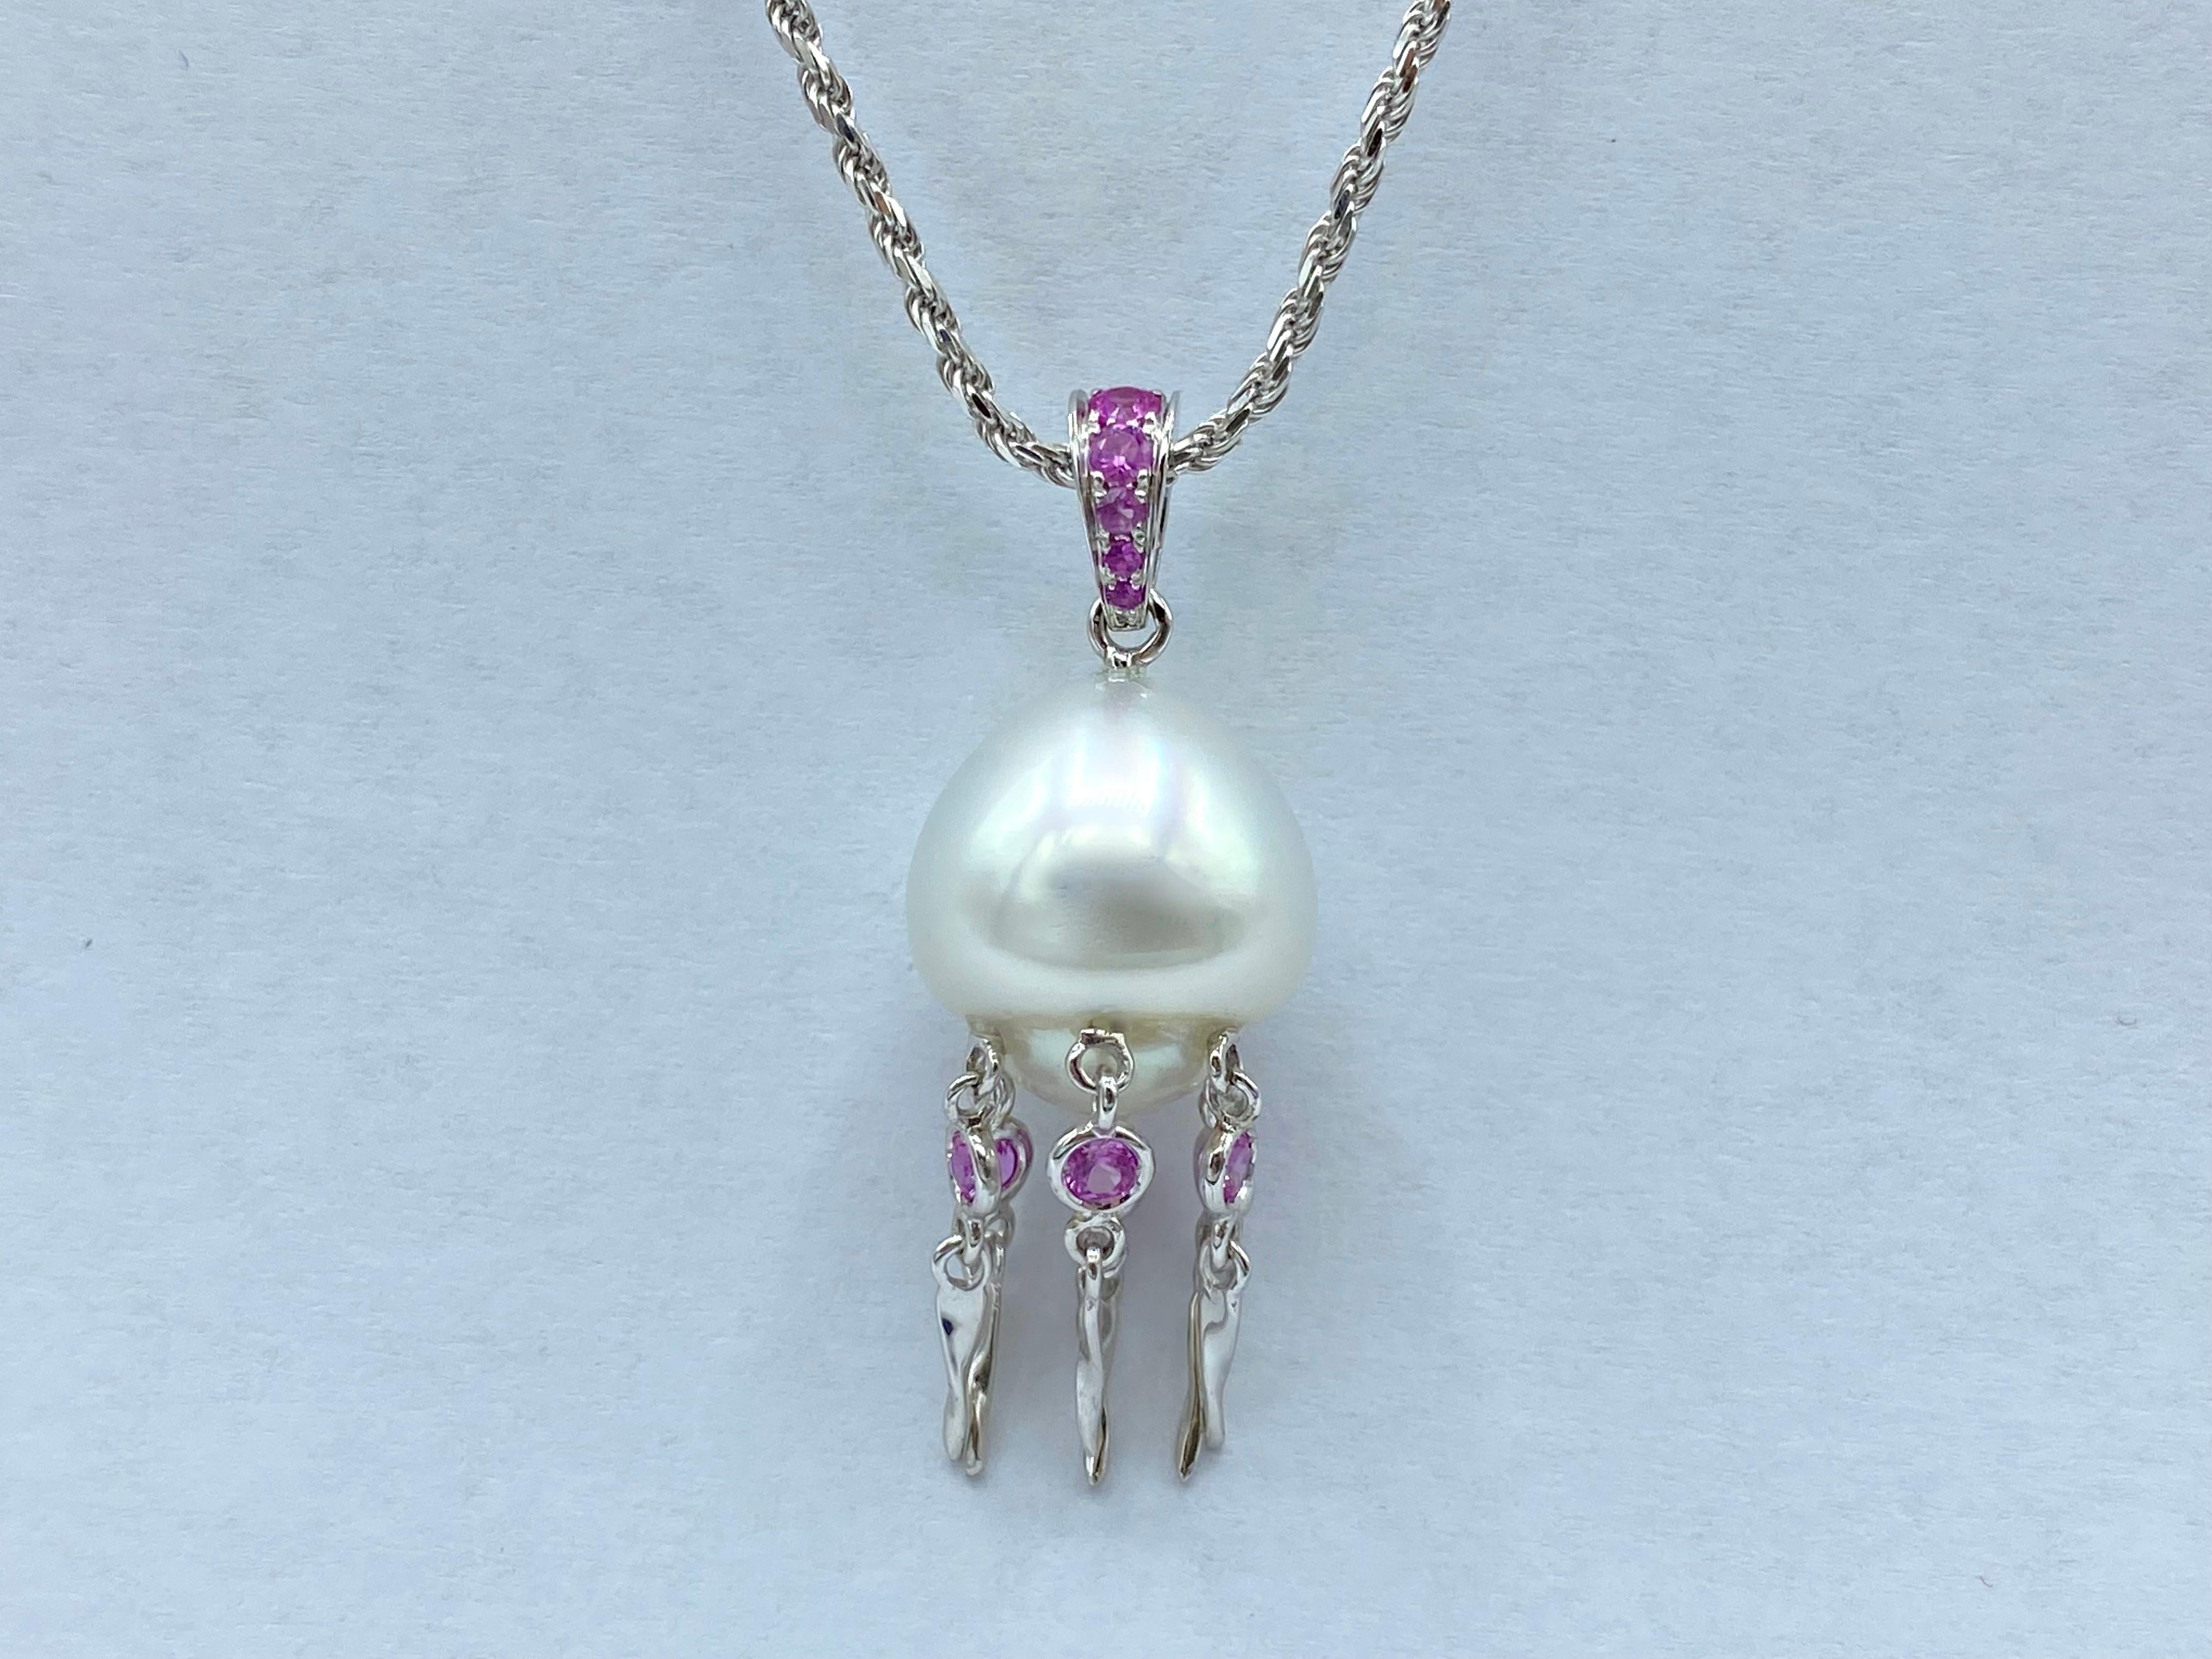 Jellyfish White Diamond Australian Pearl 18Kt White Gold Pendant/Necklace
I used a beautiful 14.5x13.5mm pearl to make a jellyfish. Its shape reminded me of a head and so I created diamond-encrusted tentacles, which vibrate with every little